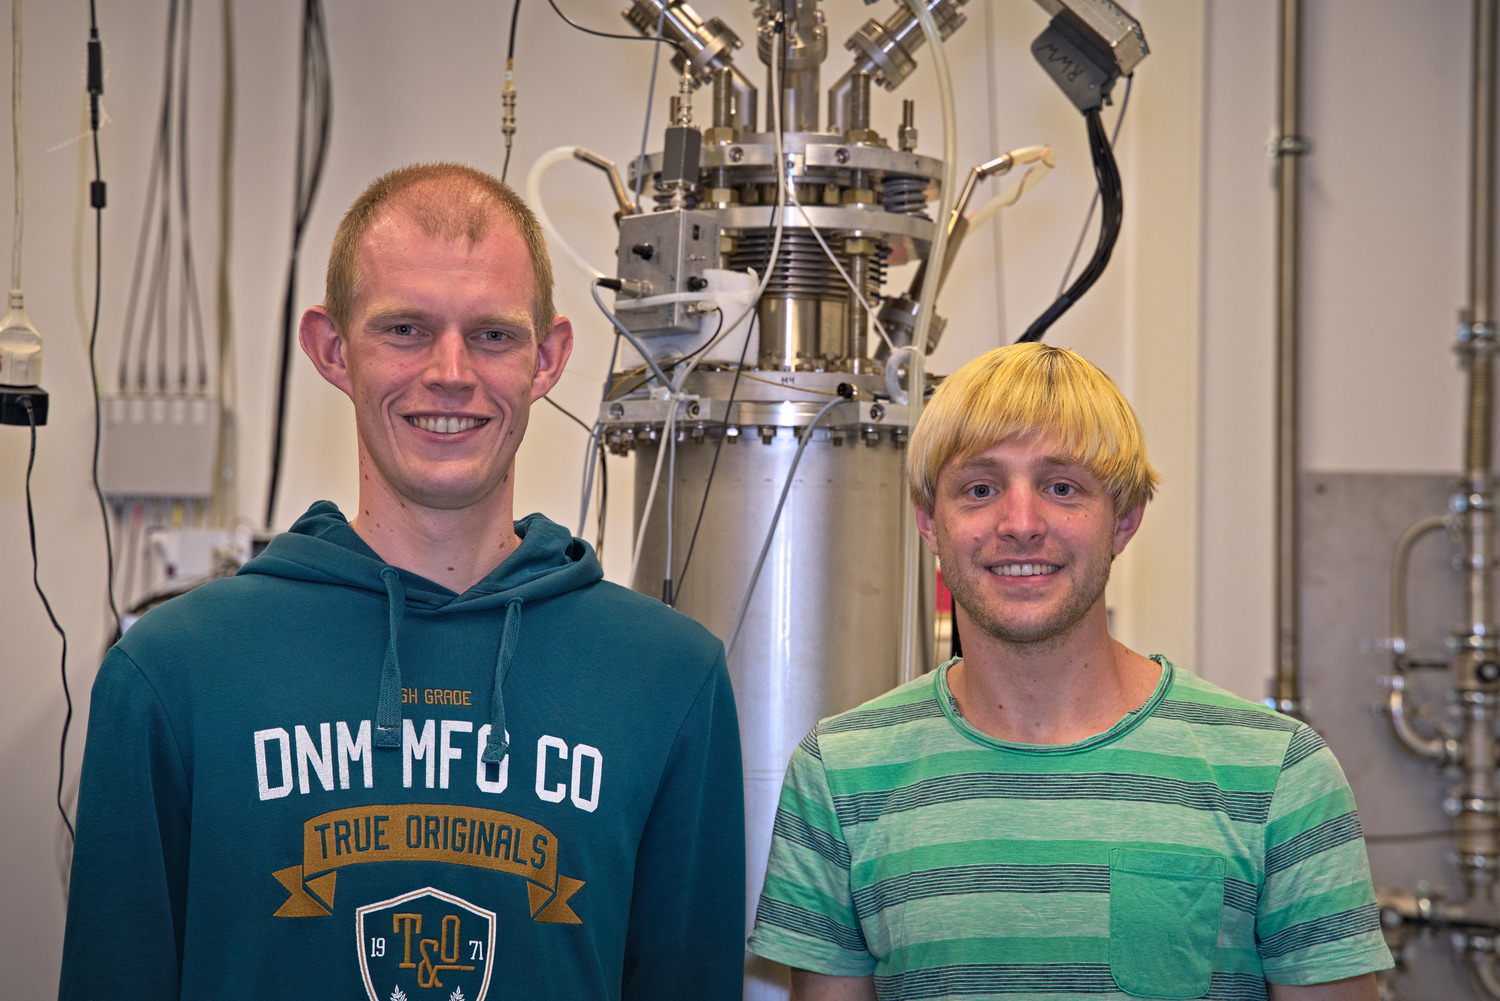 Ole Bunjes (left) and Lucas Paul (right) in front of the high-resolution scanning tunneling microscope built in Göttingen that they used to carry out their research.